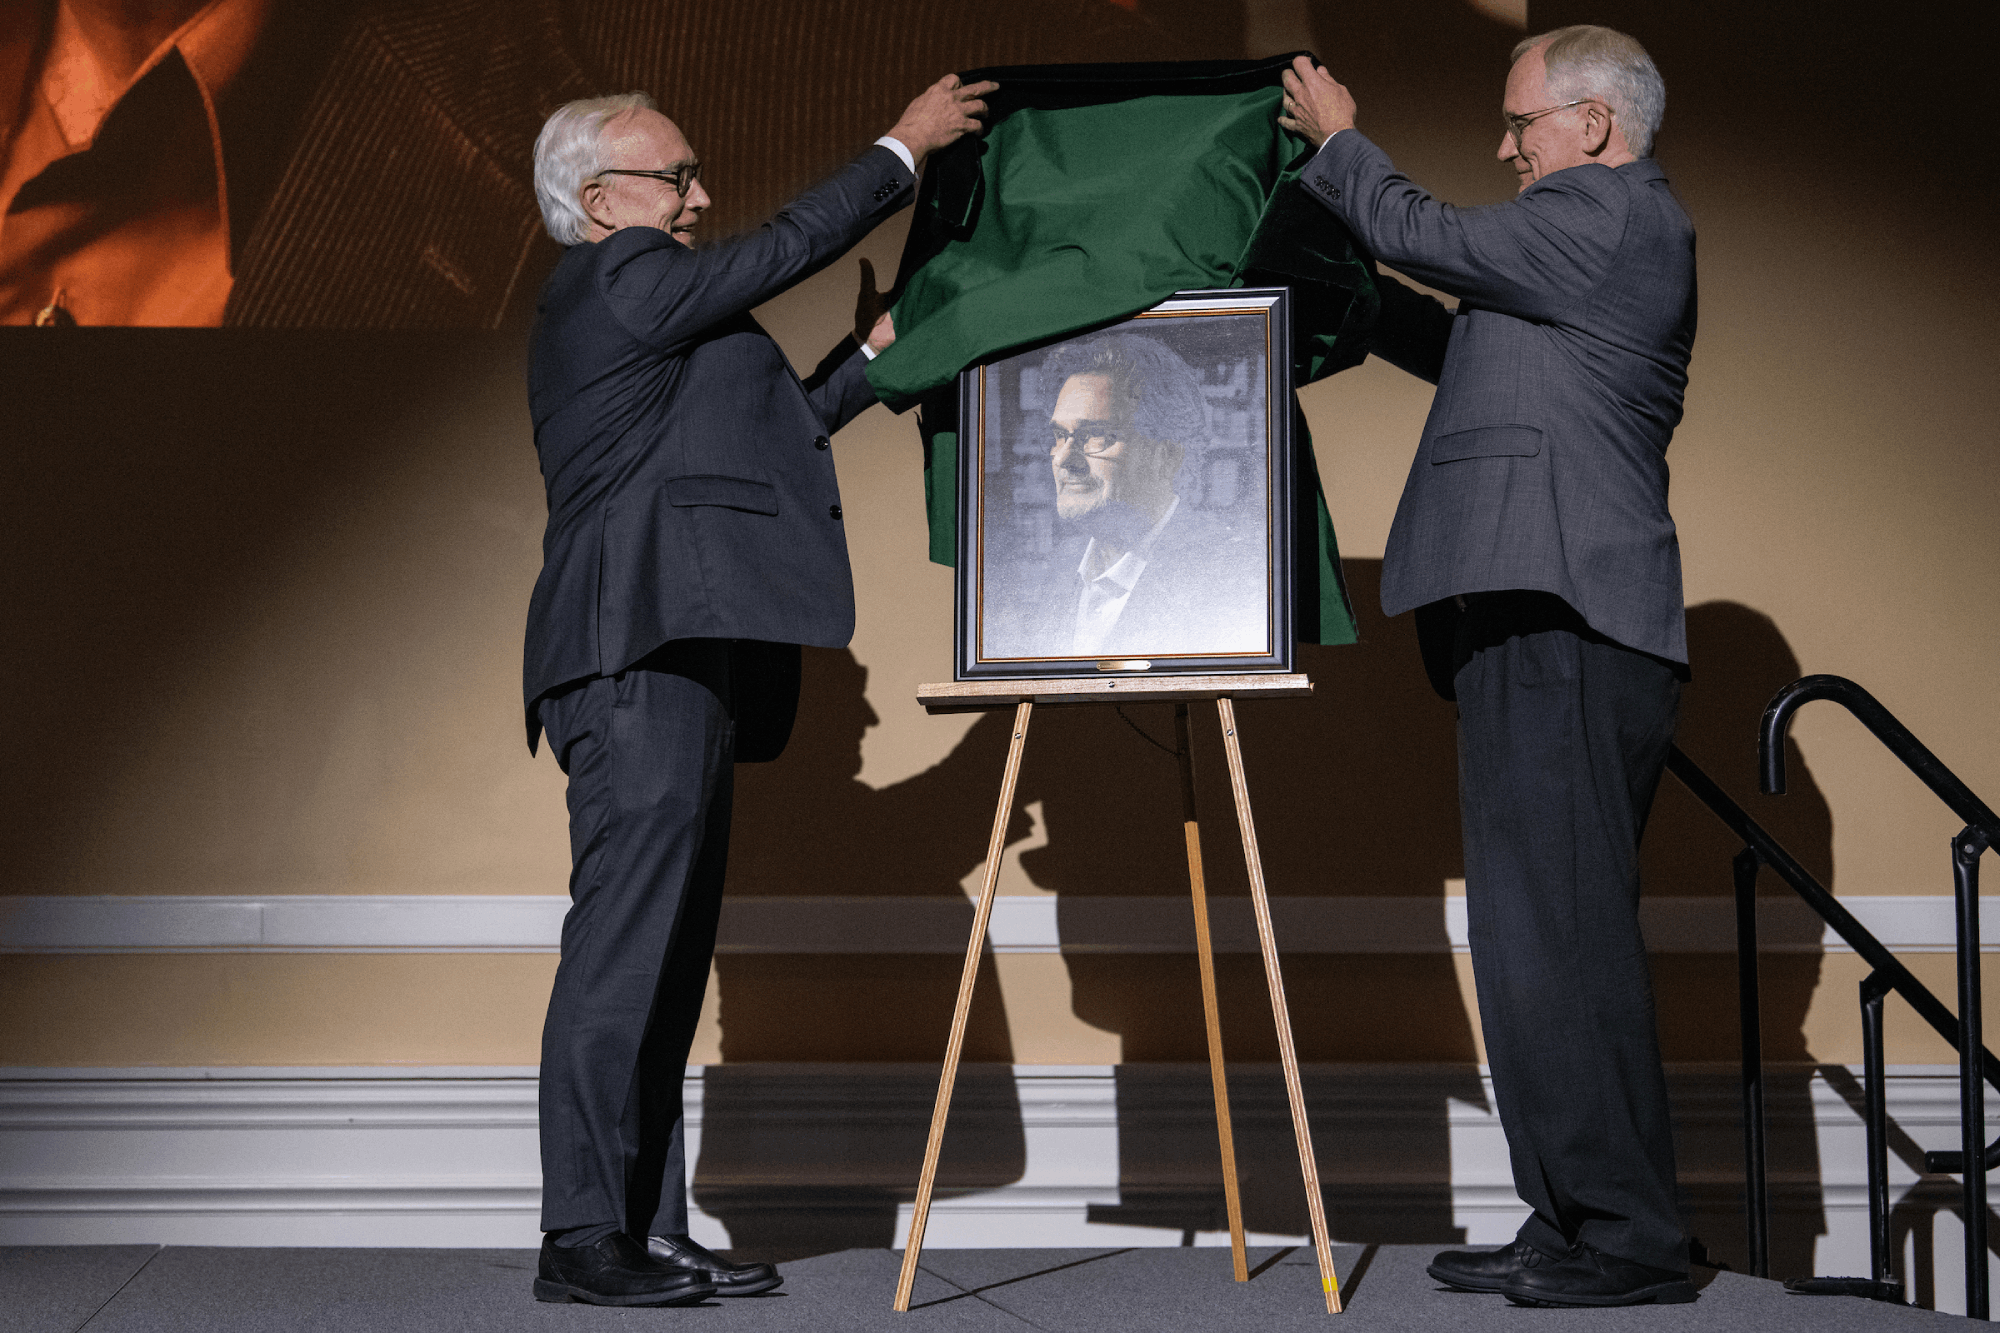 Dr. Hugh Sherman, President of Ohio University, helps to unveil Professor Srdjan Nesic’s official portrait at Nesic’s Distinguished Professor Lecture and Portrait Unveiling in the Baker Ballroom in Athens, Ohio.